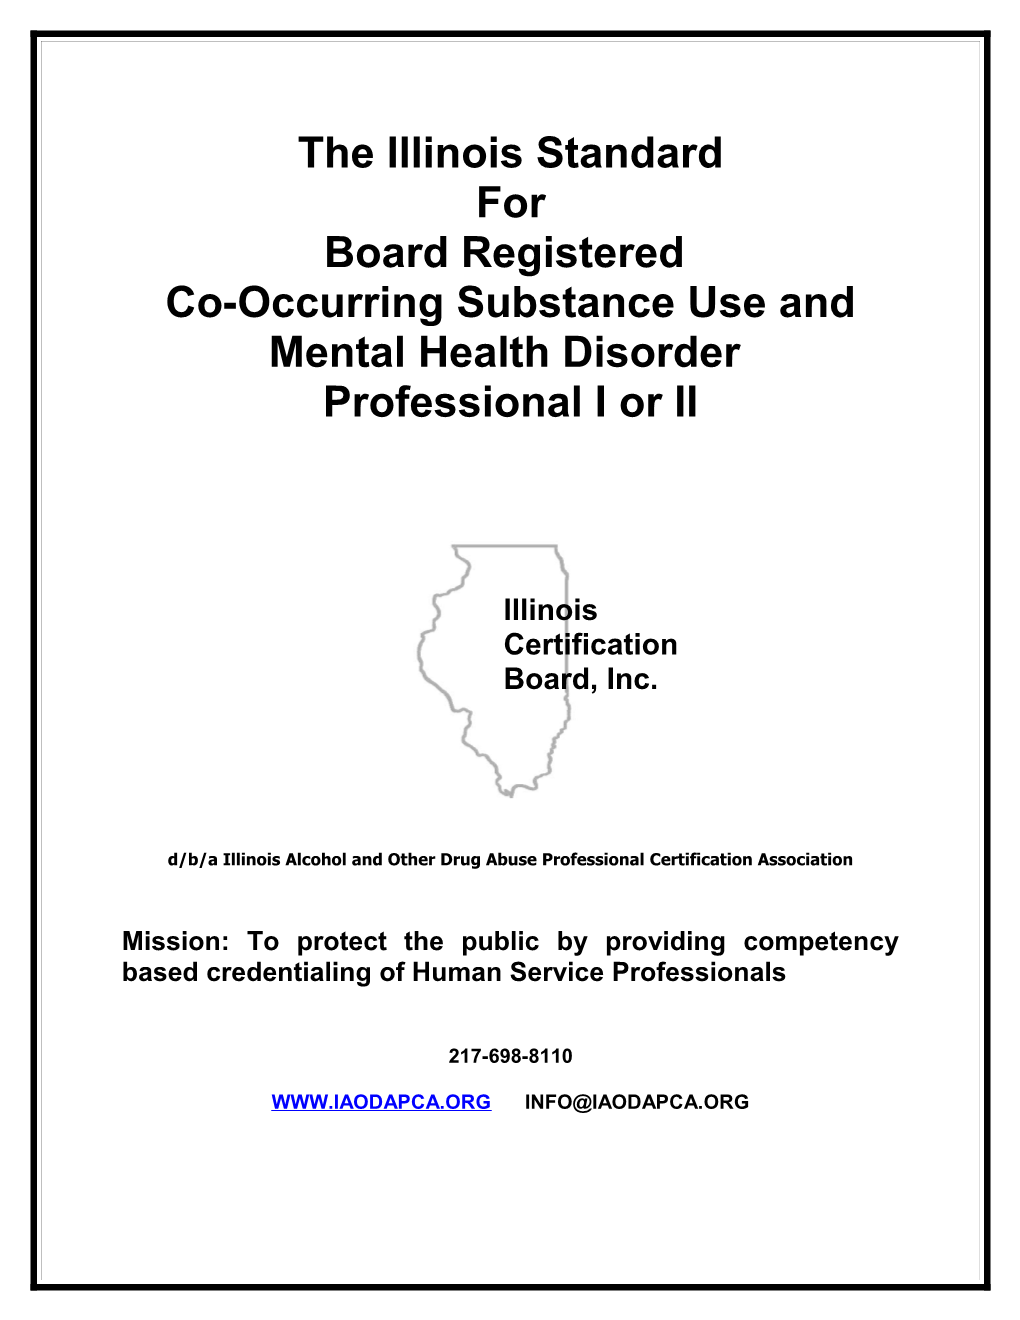 Co-Occurring Substance Use and Mental Health Disorder